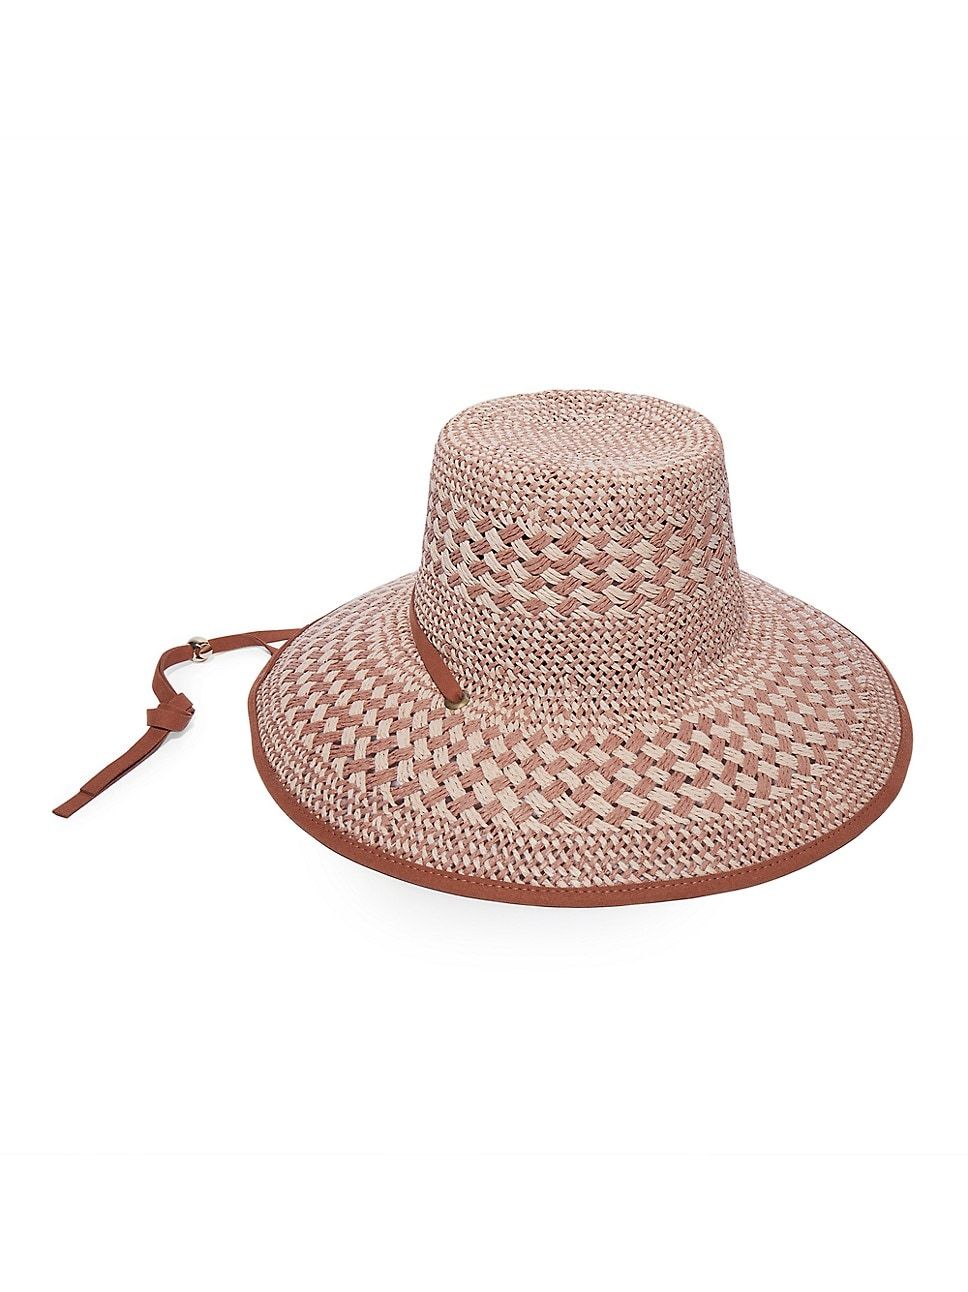 Brielle Check Flat-Top Straw Sunhat | Saks Fifth Avenue